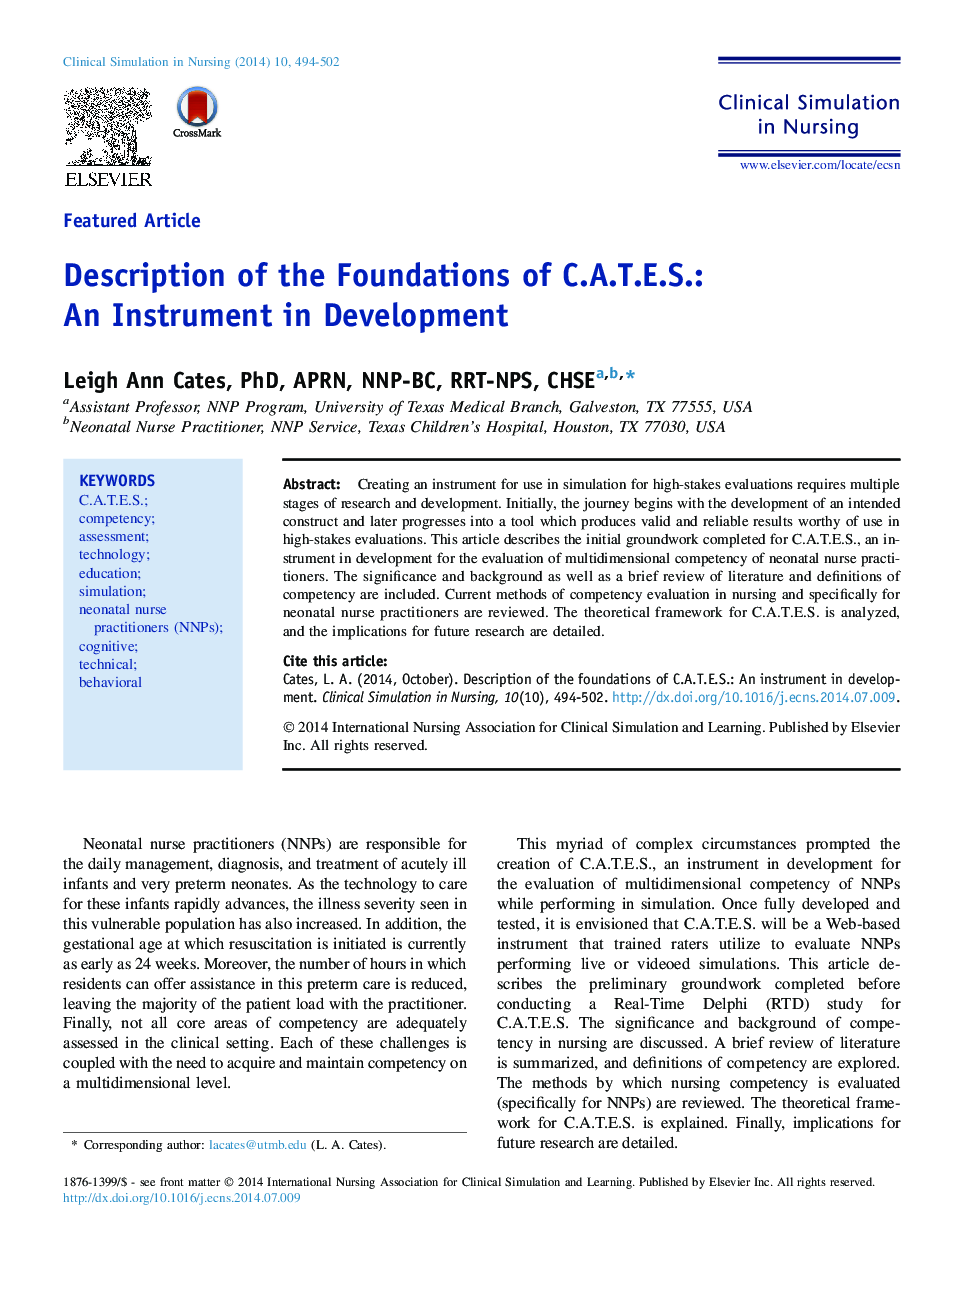 Description of the Foundations of C.A.T.E.S.: An Instrument in Development